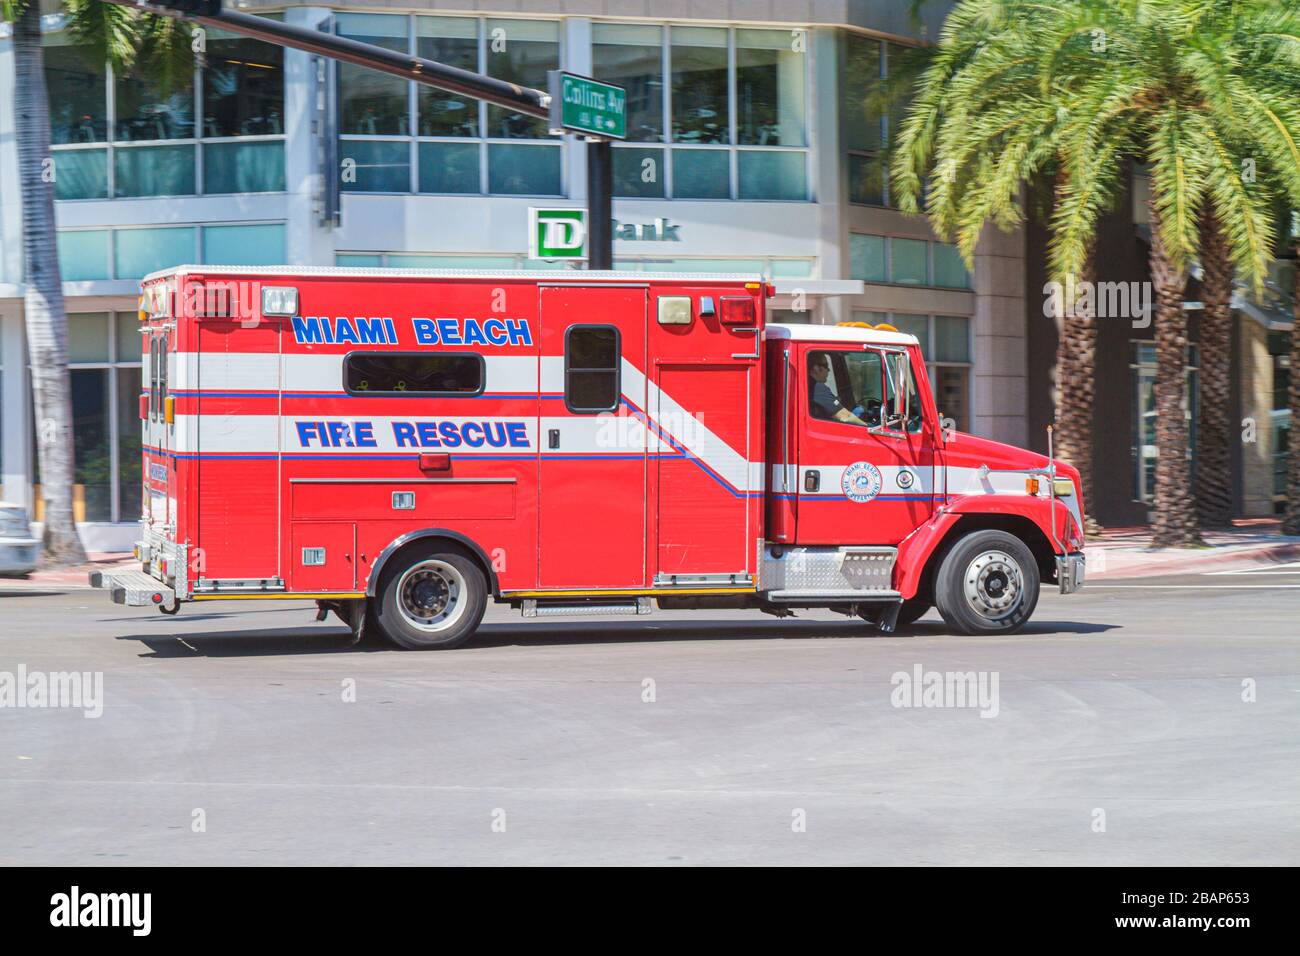 Miami Beach Florida,5th Fifth Street,Miami Beach,Fire Rescue,ambulance,urgence,véhicule,rouge,FL111014067 Banque D'Images